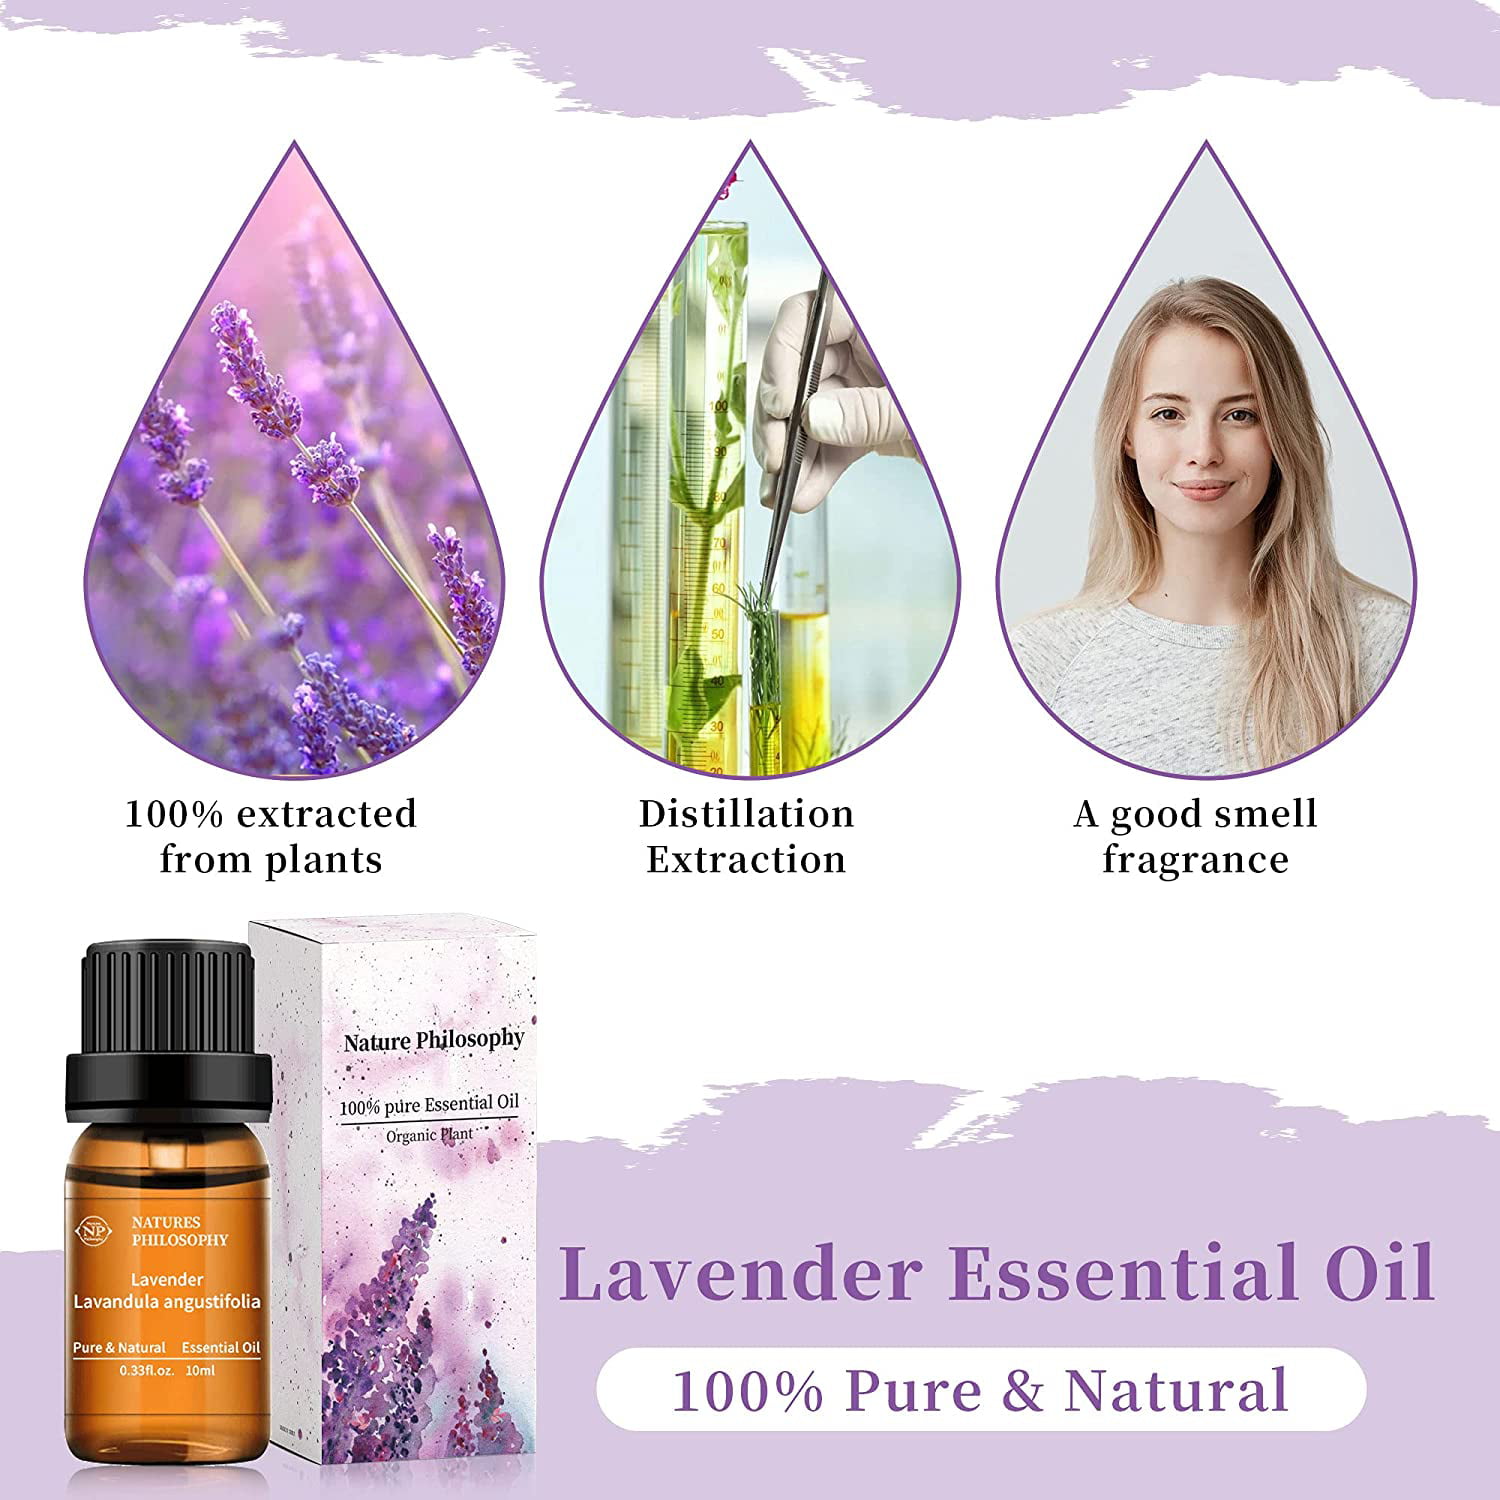  Lavender Essential Oil, 100% Pure, Undiluted, Natural, Premium  Grade, Organic, Lavender Oil for Diffuser or Aromatherapy, 10ml 0.33 fl oz,  Lavandula Angustifolia for Home Fragrance and Cosmetics : Health & Household